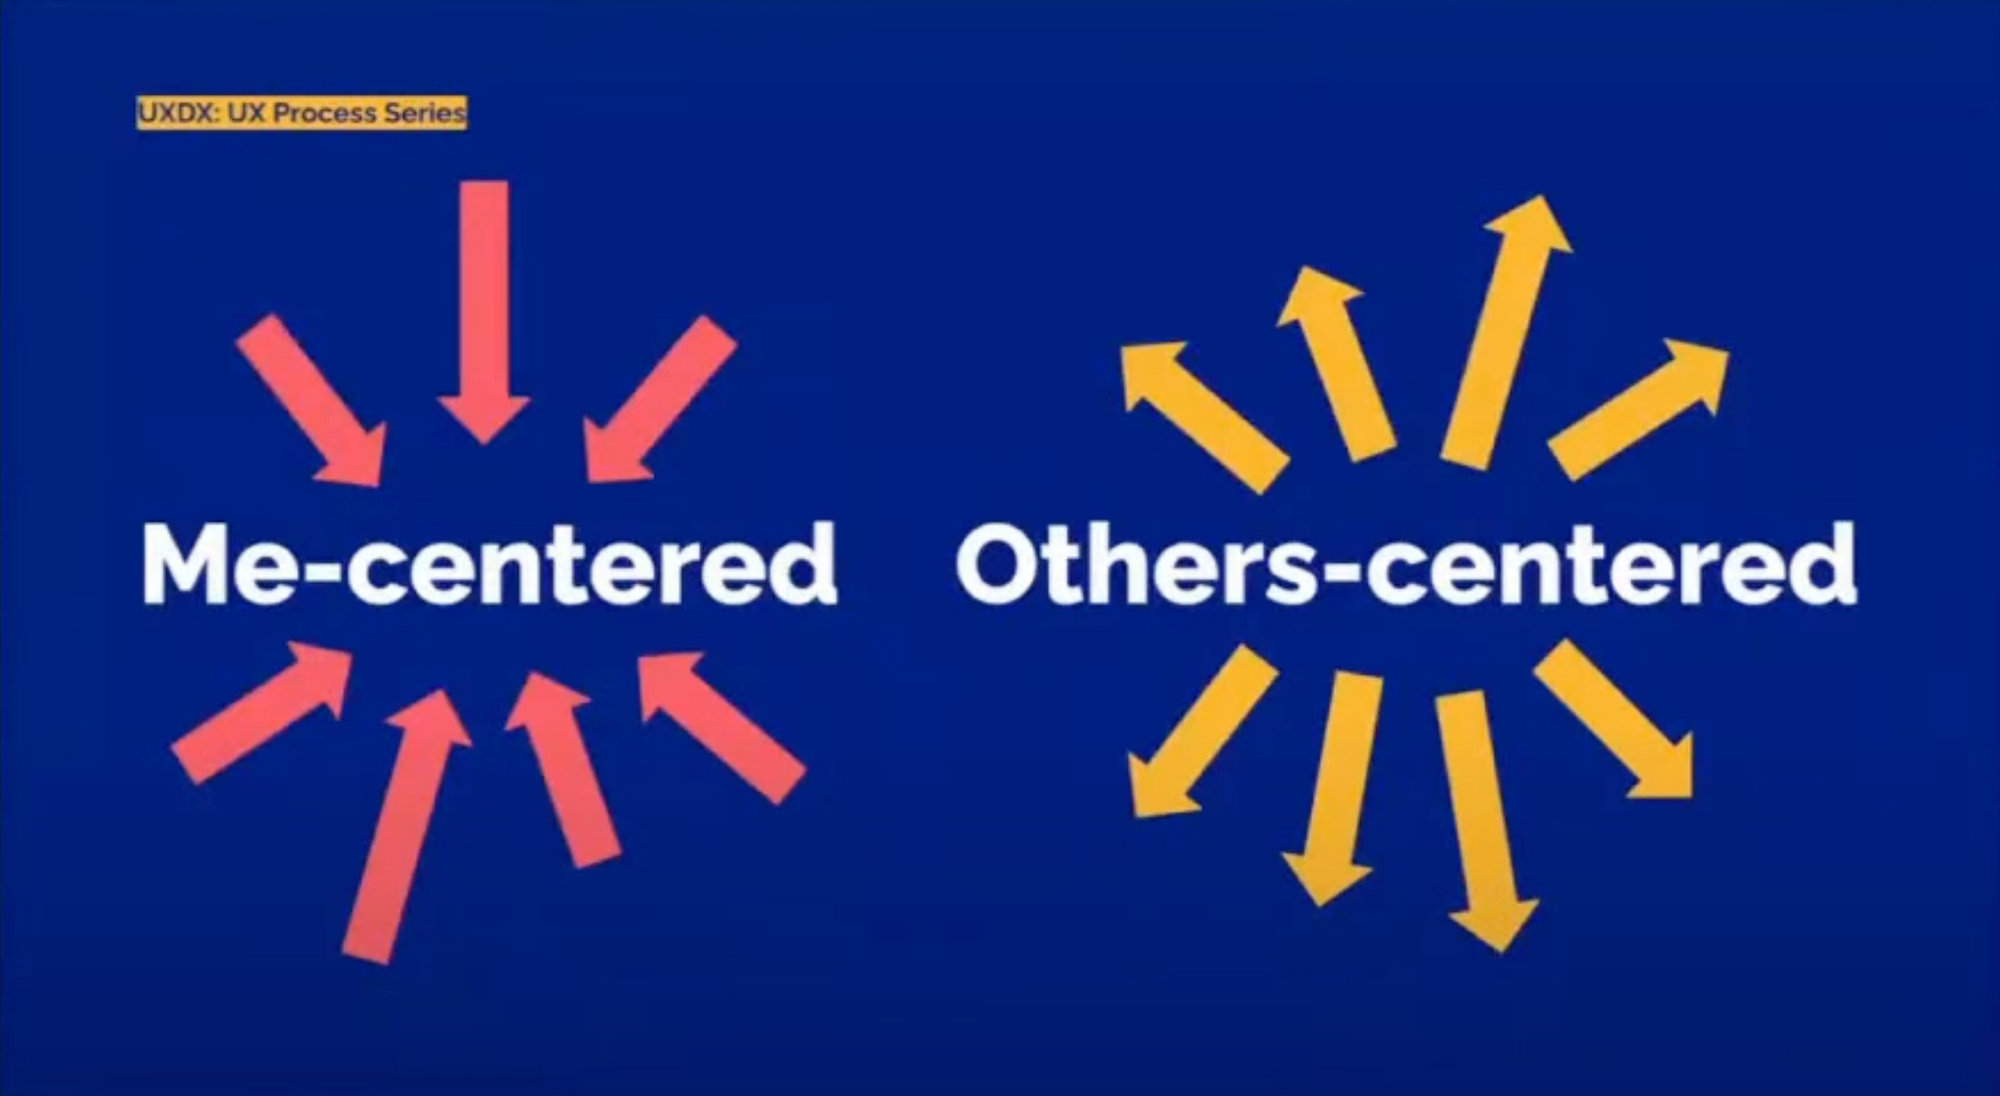 Me-centered versus Others-centered